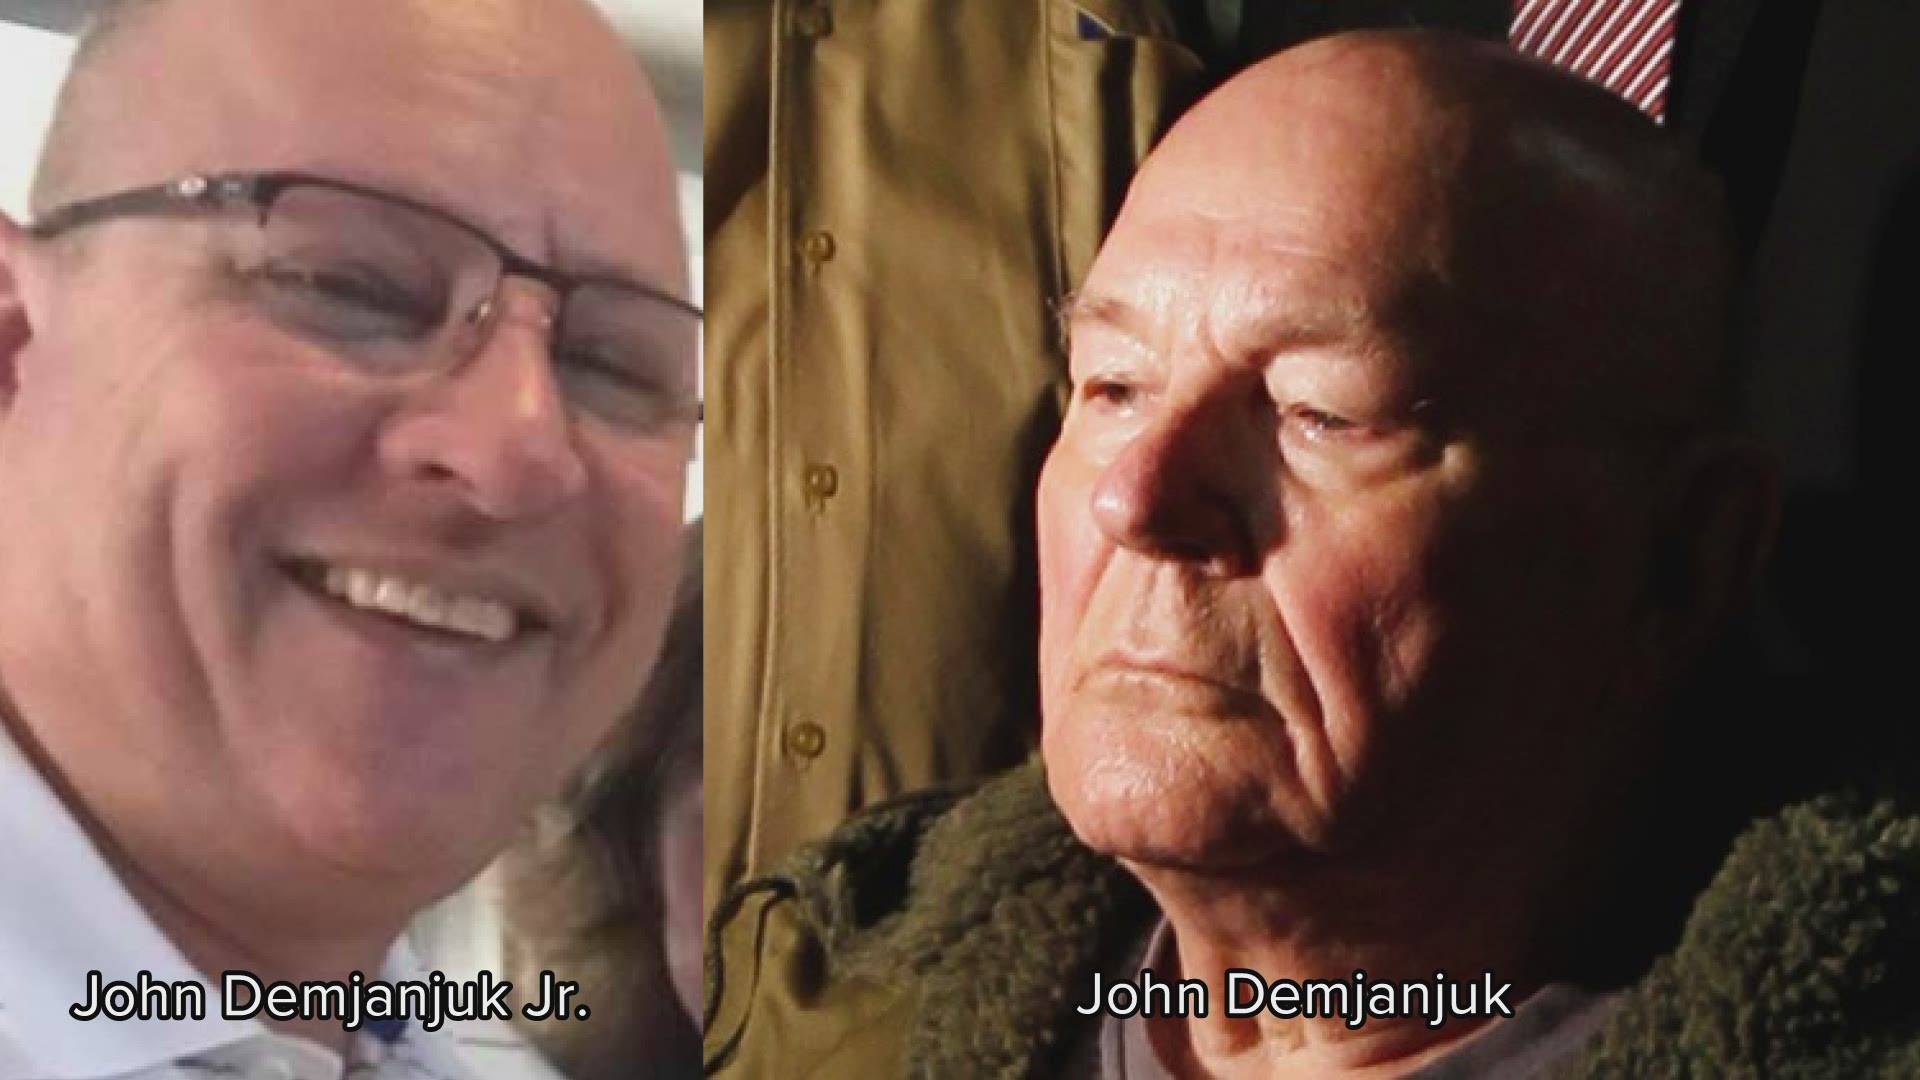 John Demjanjuk Jr. claims key facts were left out of the series, and that his father is innocent. He spoke with 3News' Andrew Horansky Wednesday.